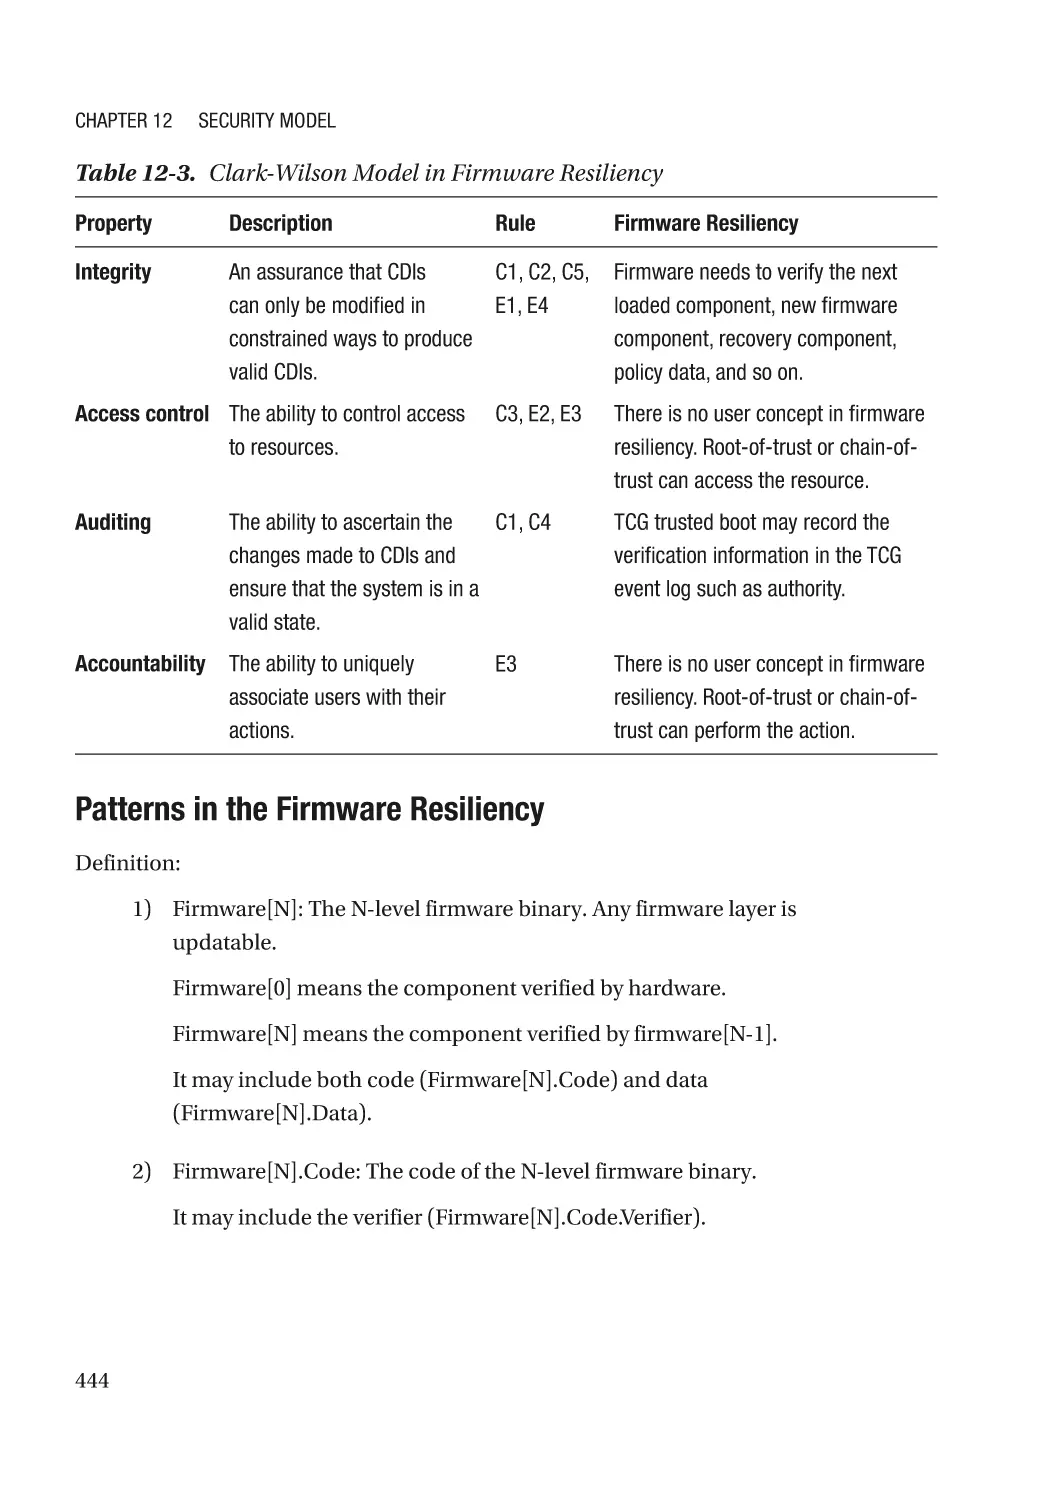 Patterns in the Firmware Resiliency